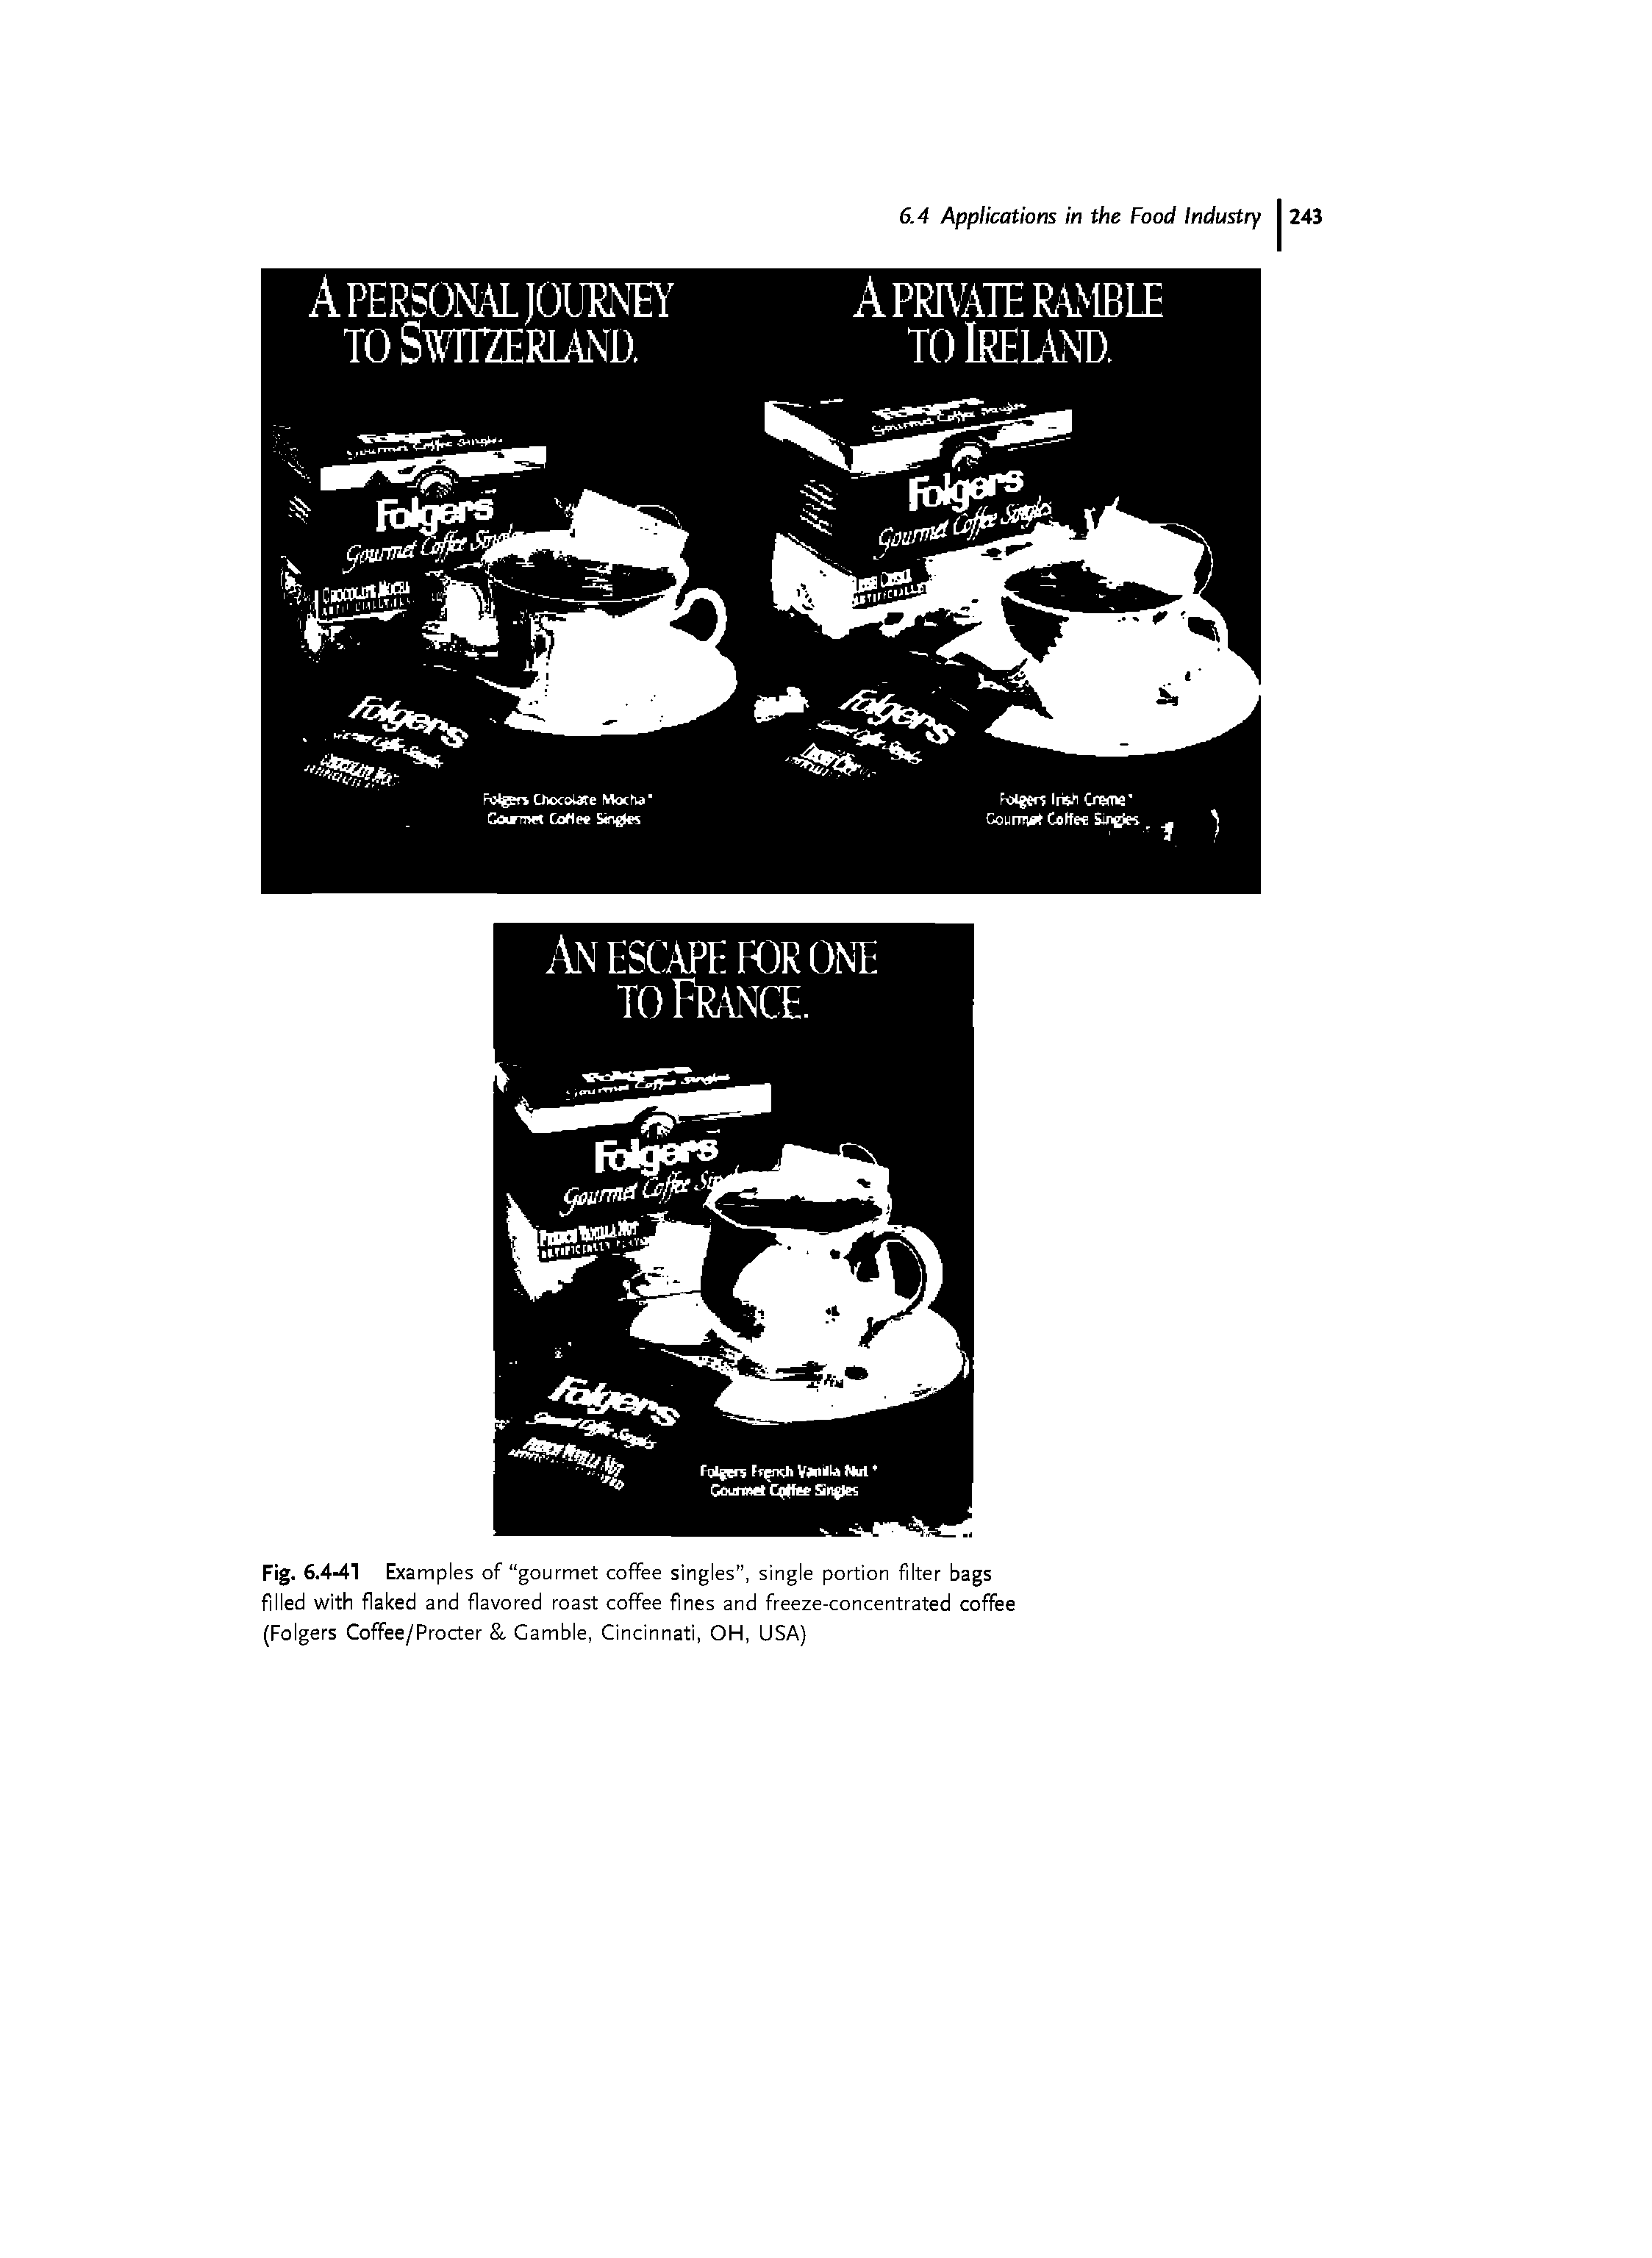 Fig. 6.4-41 Examples of gourmet coffee singles , single portion filter bags filled with flaked and flavored roast coffee fines and freeze-concentrated coffee (Folgers Coffee/Procter, Gamble, Cincinnati, OH, USA)...